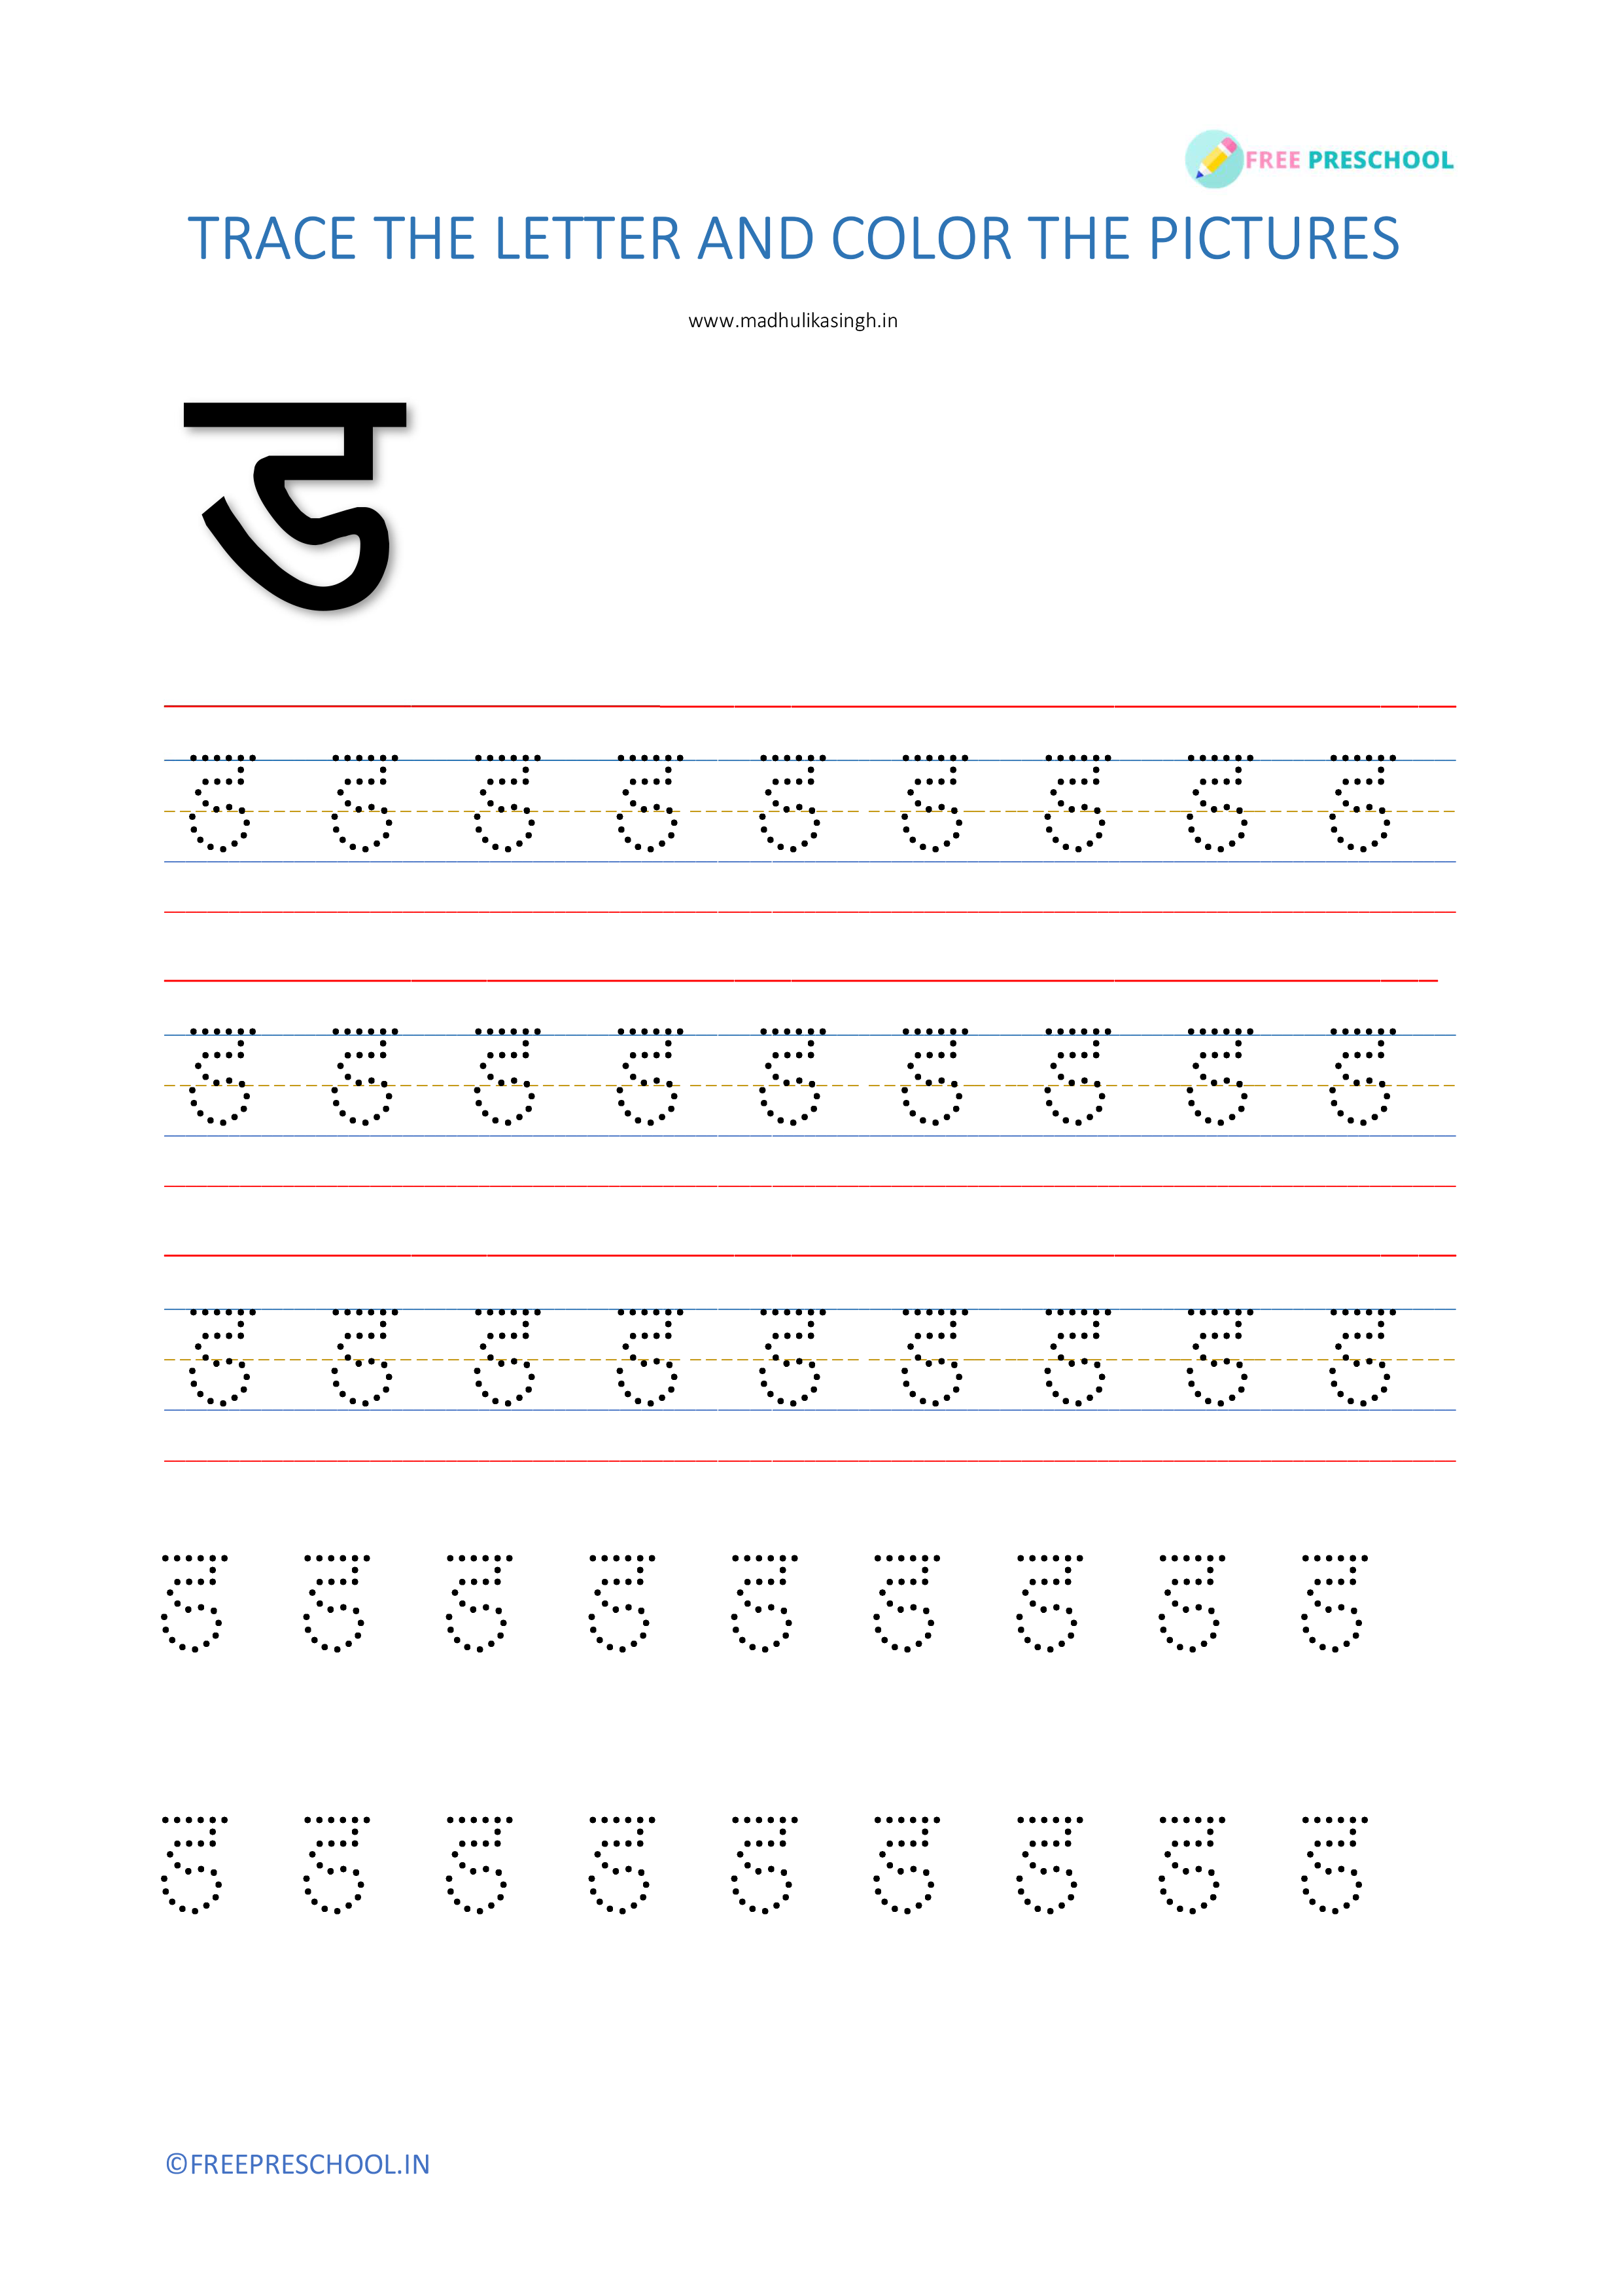 Hindi Alphabet Tracing Worksheets Printable Pdf To 56 Pages 